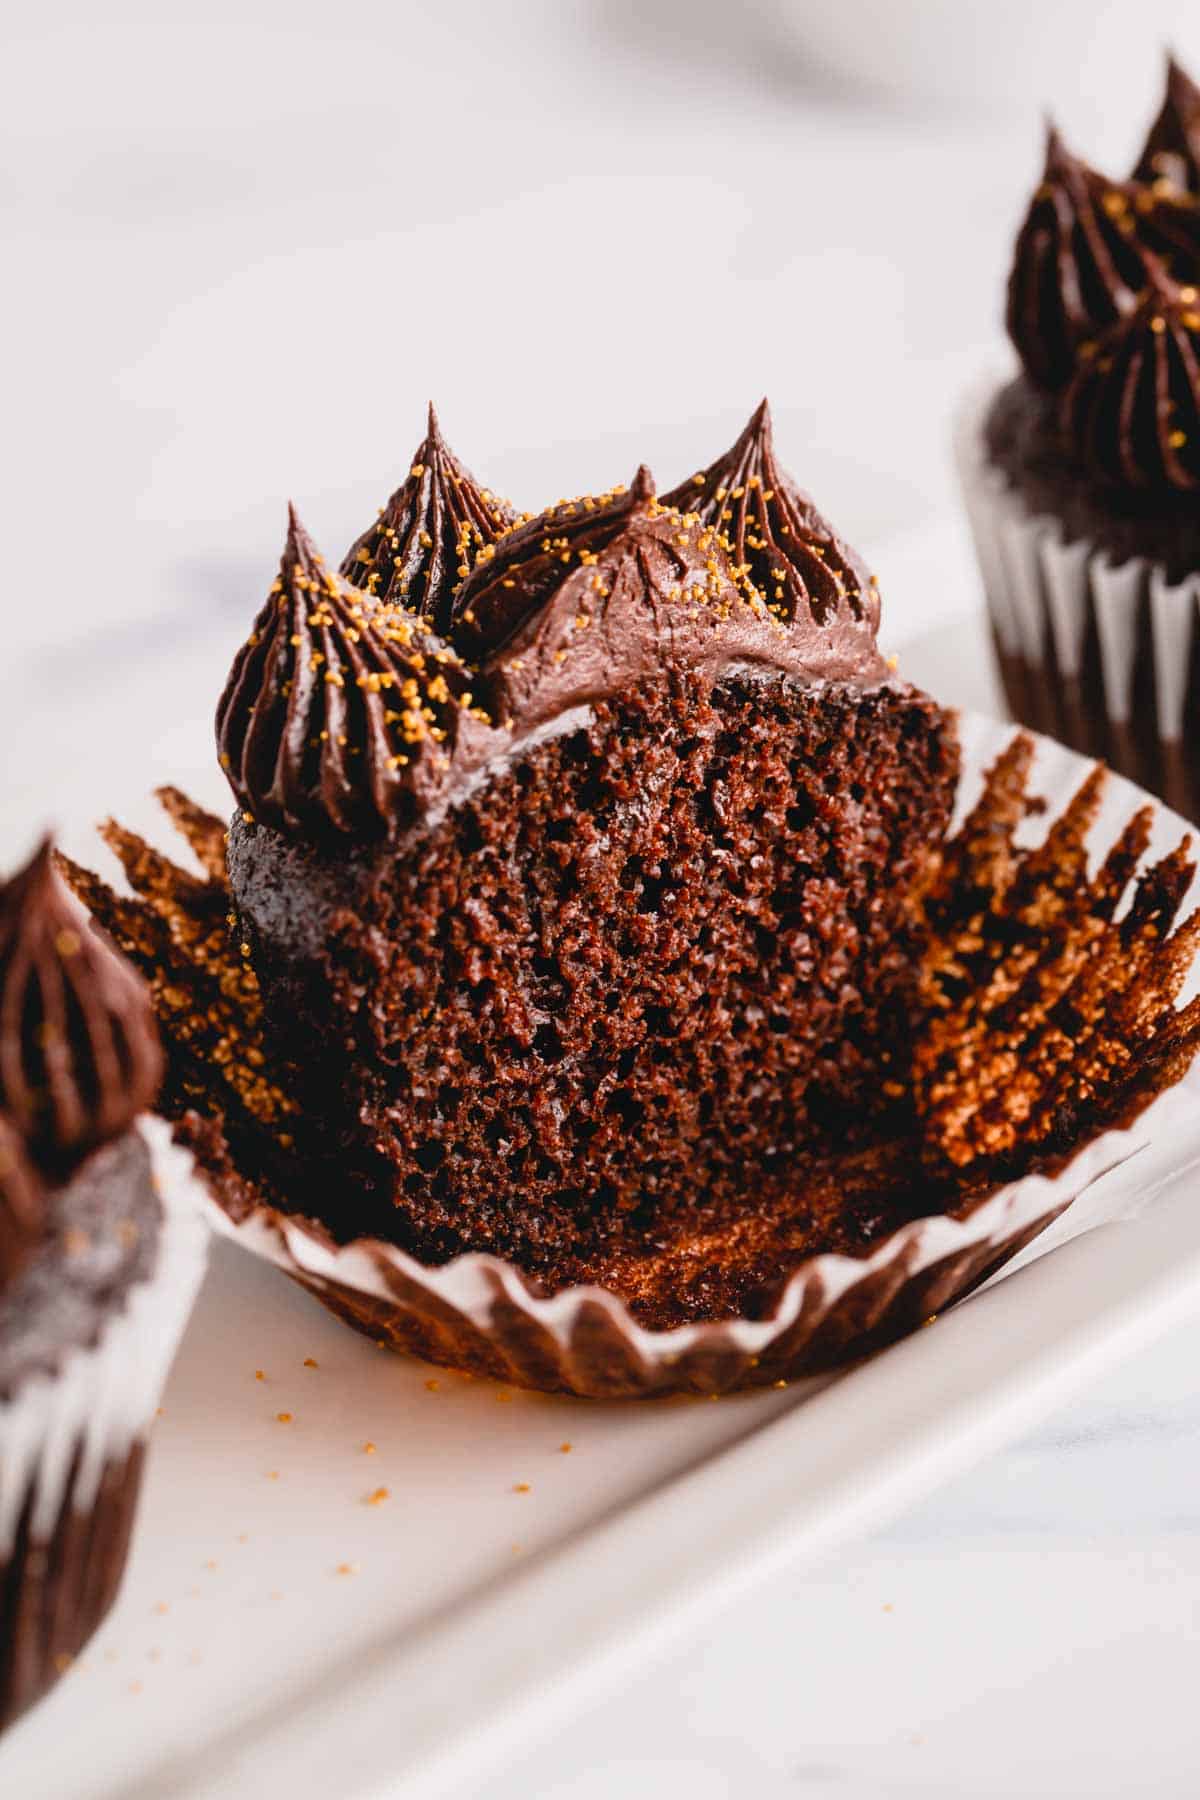 Half of an ultimate chocolate cupcake topped with chocolate frosting on a cupcake liner.